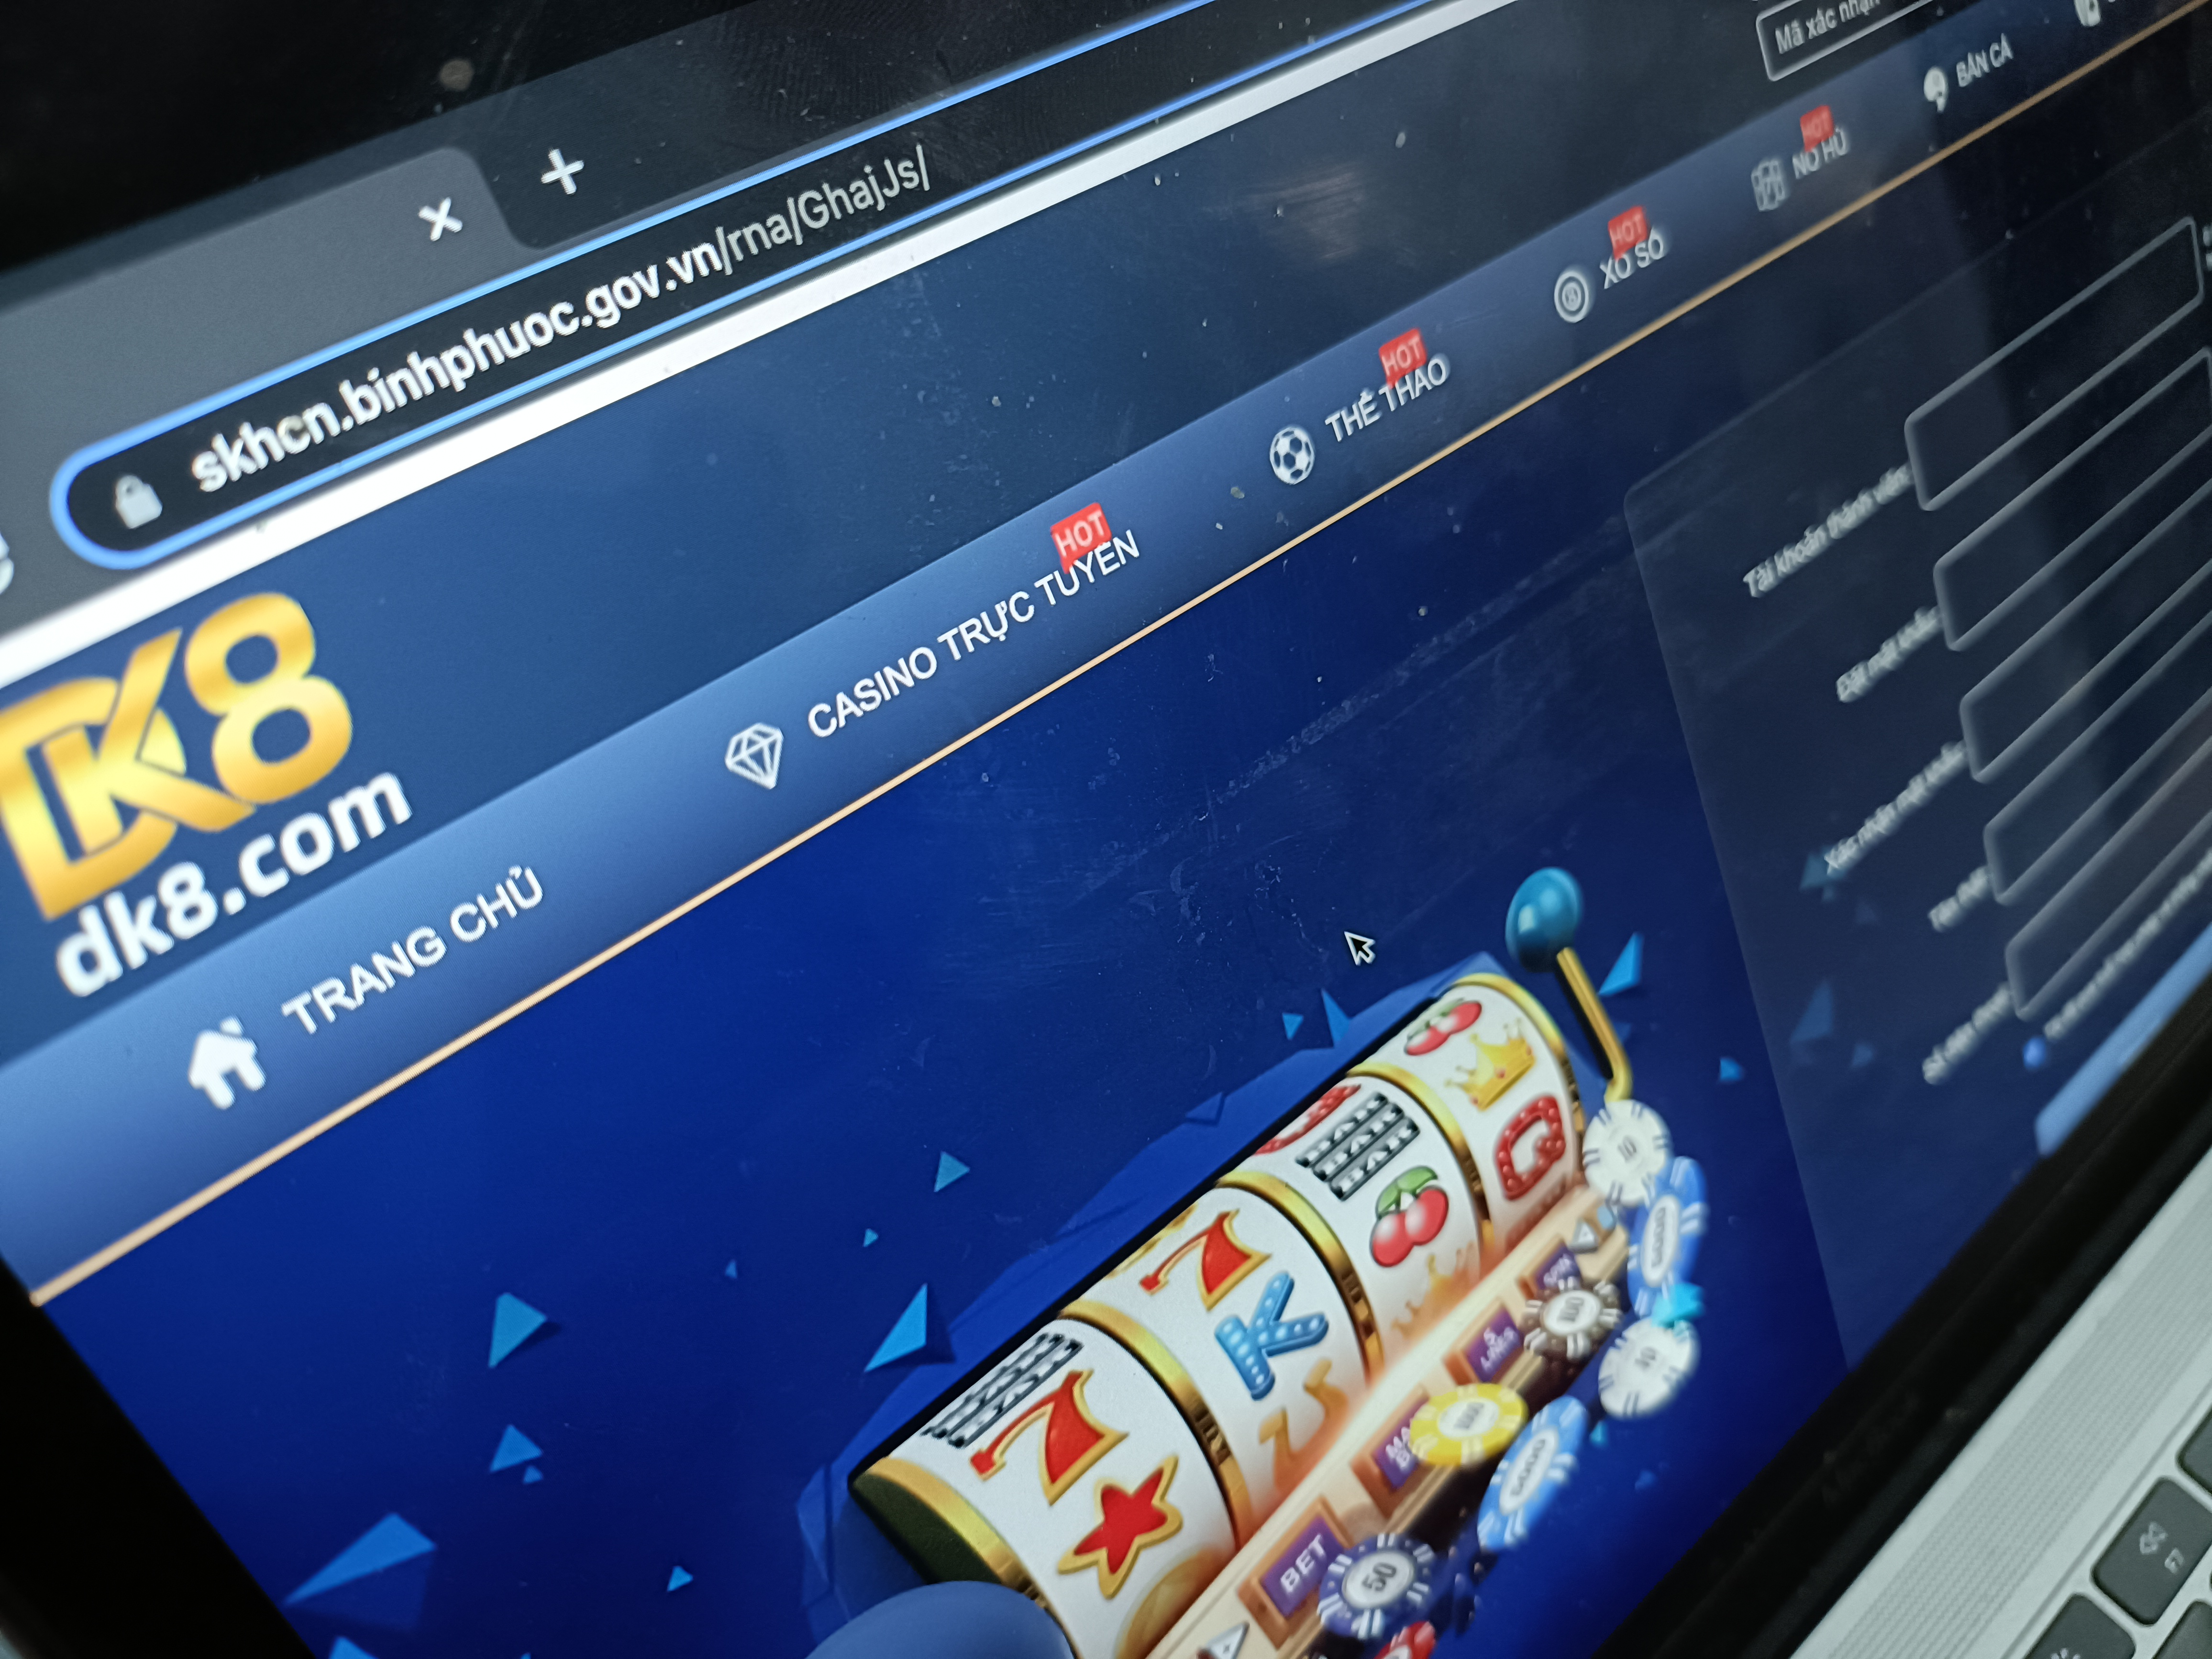 Websites of Vietnam's state-run agencies disturbed by ads for online card games